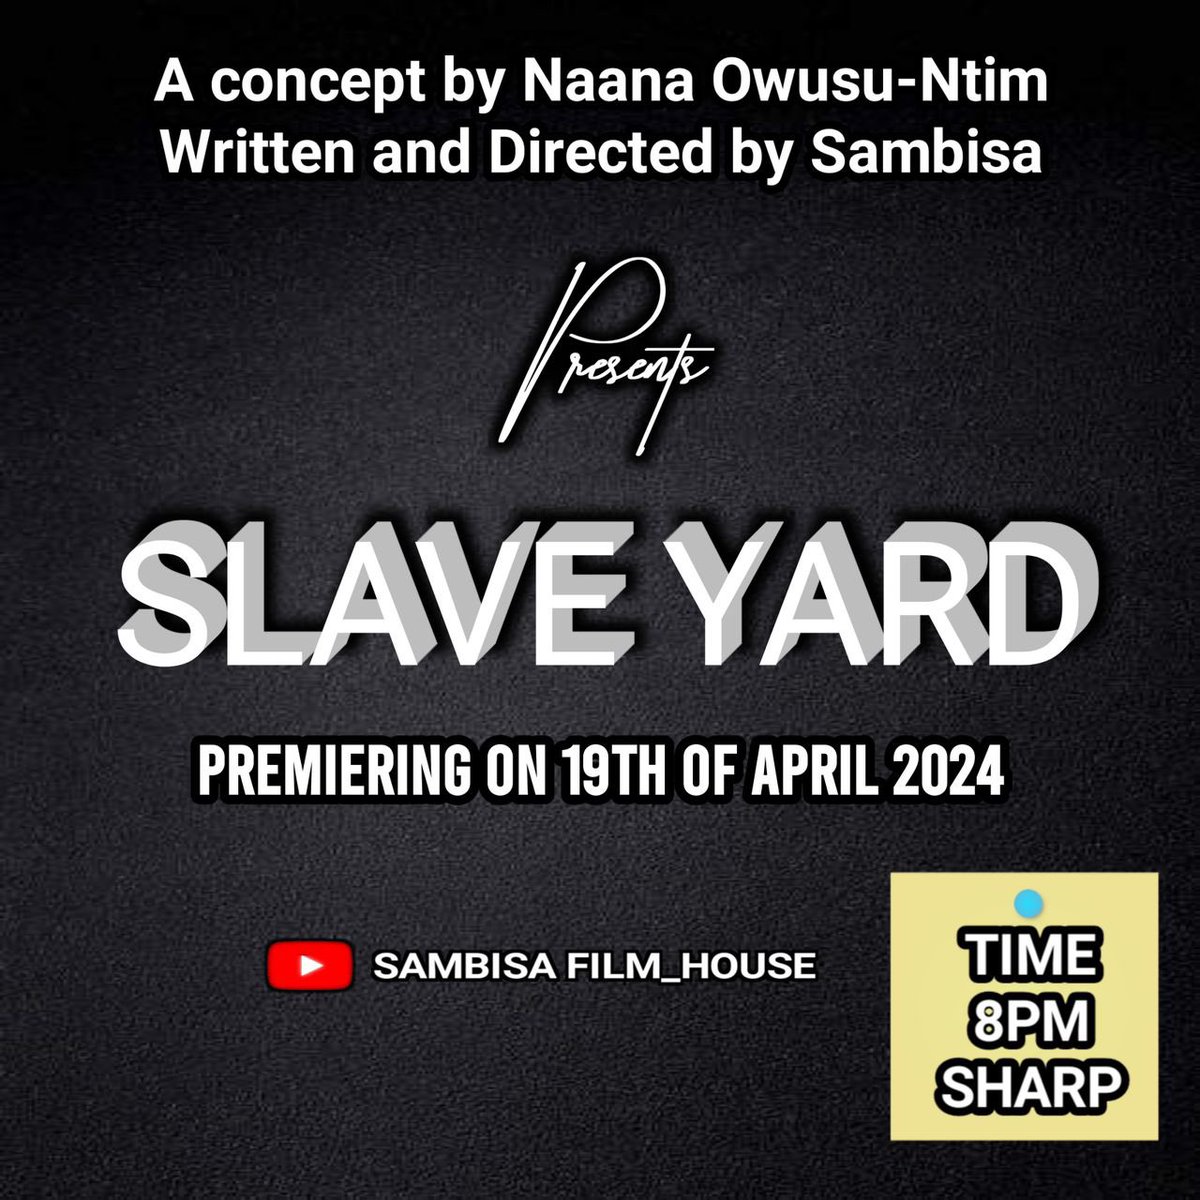 On the 19th of april tonight , Don't miss out! 'The #SlaveYard' movie, written and directed by @sambisafilms @sheIs_naana , premieres on YouTube this Friday. Be sure to subscribe and enable notifications to catch it! youtu.be/IPYPlSCXAYE